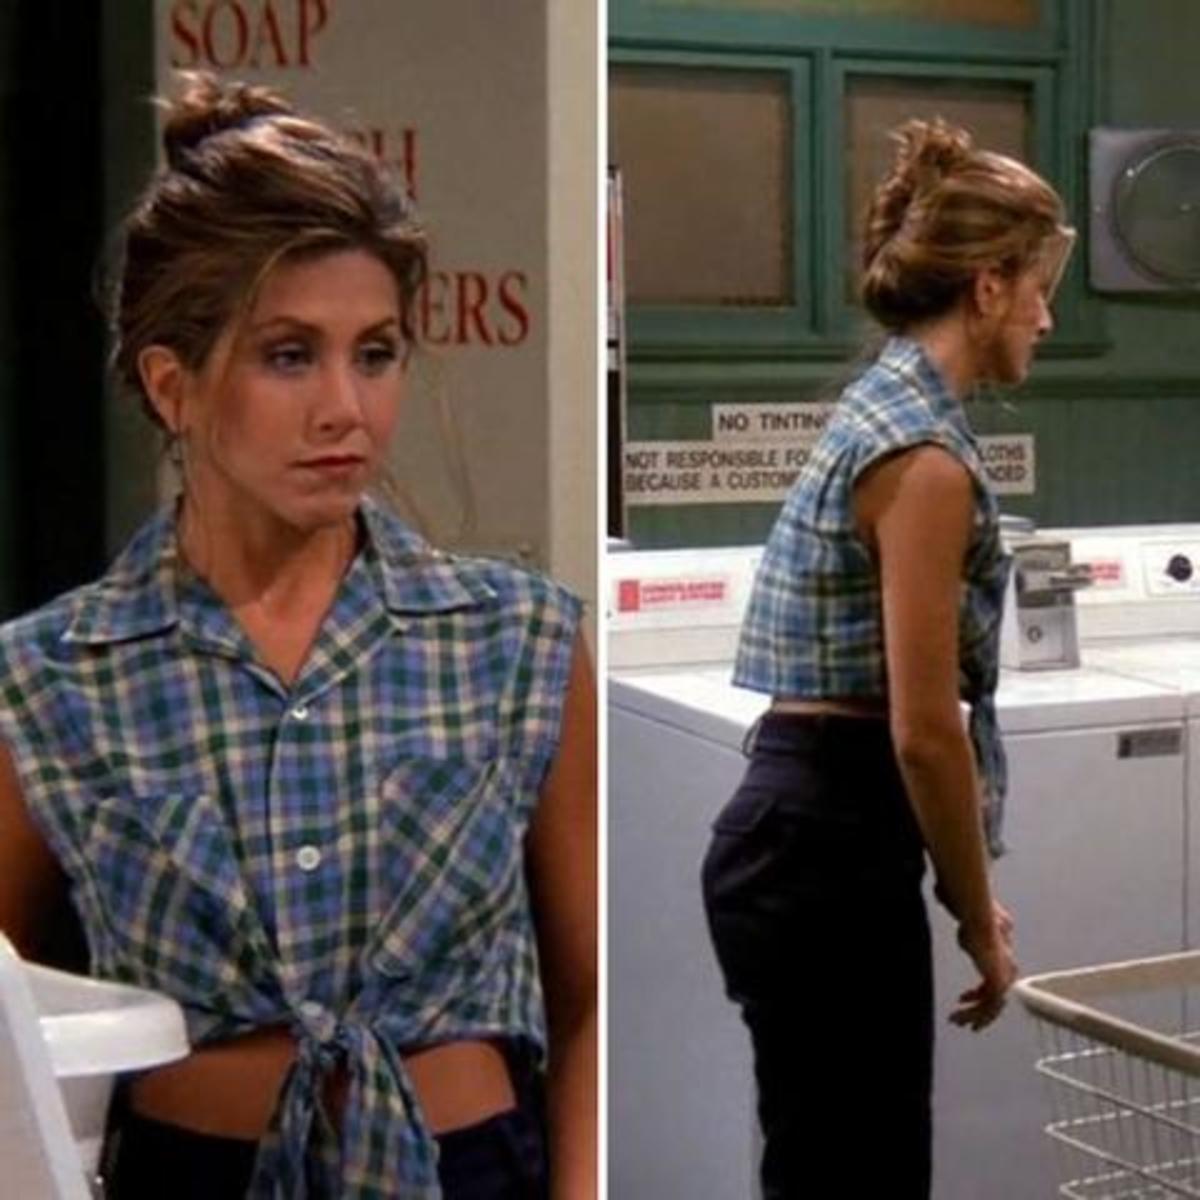 Even flannel and shorts were elevated and stylish with Rachel.